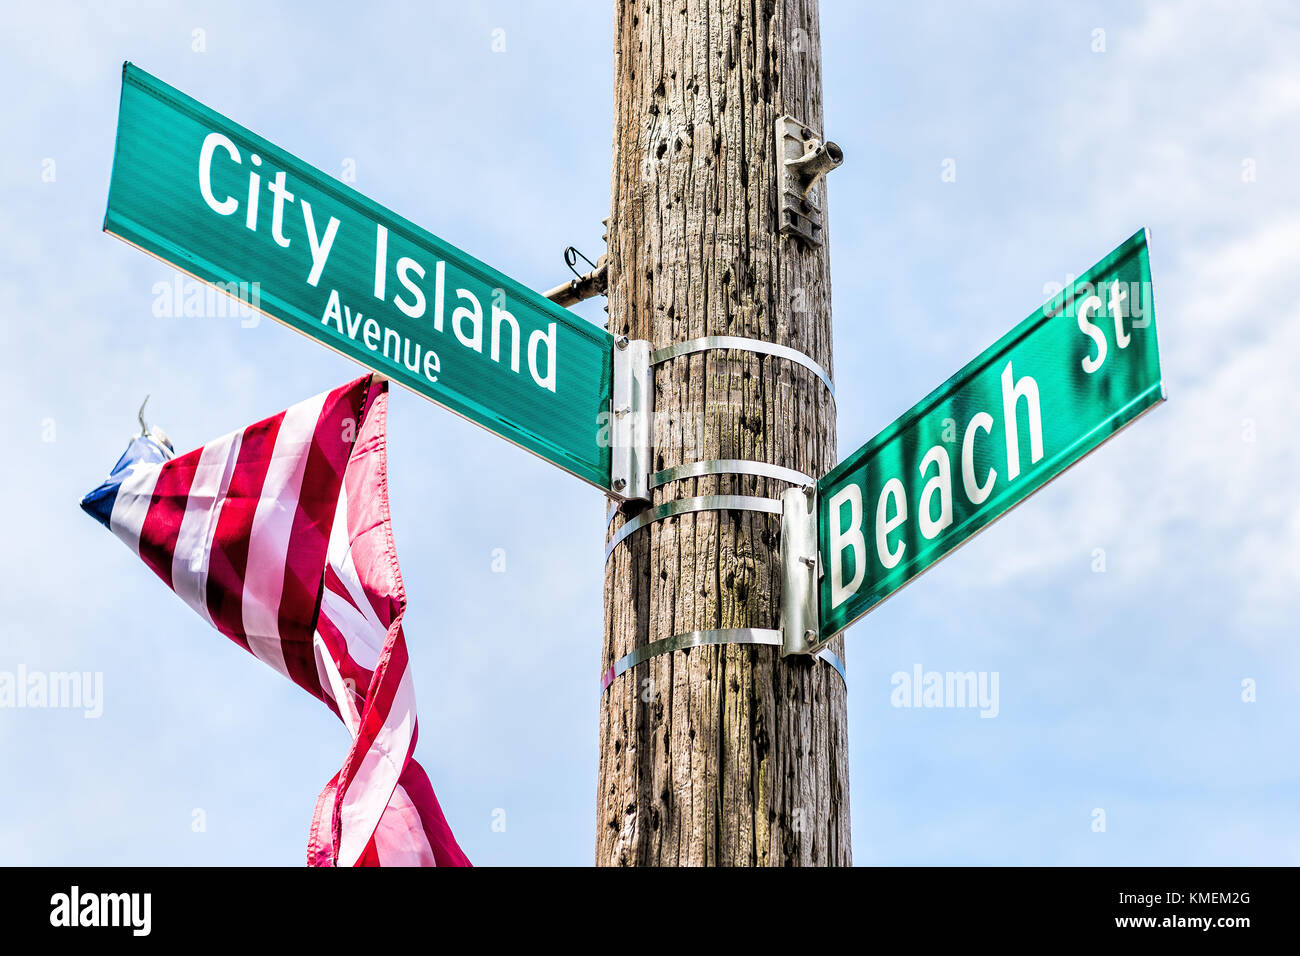 City Island Avenue and Beach street signs at intersection in Bronx, New York City, NYC with american flag Stock Photo